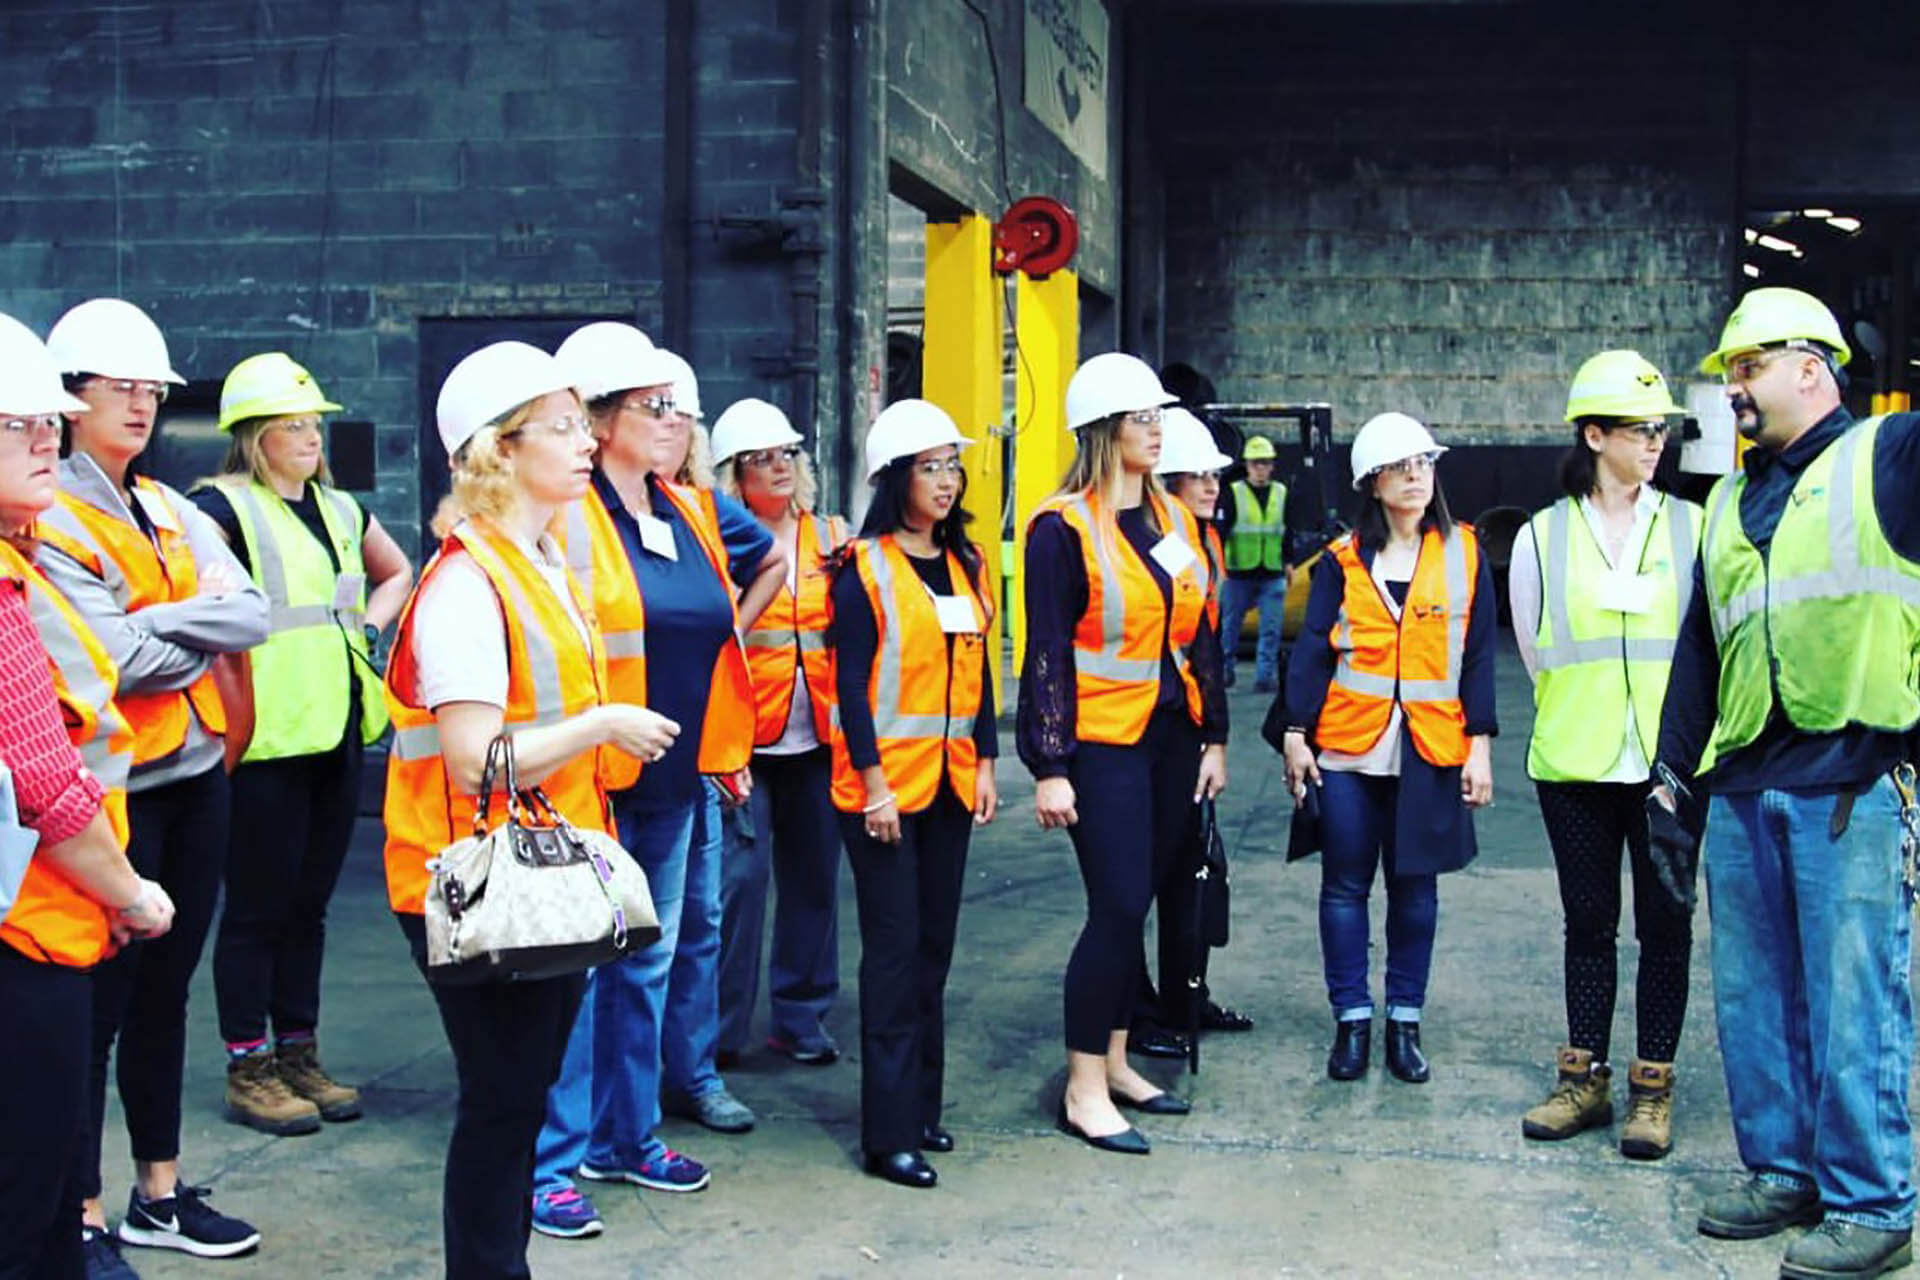 Women in Manufacturing Illinois Touring the USM Recycling Facility